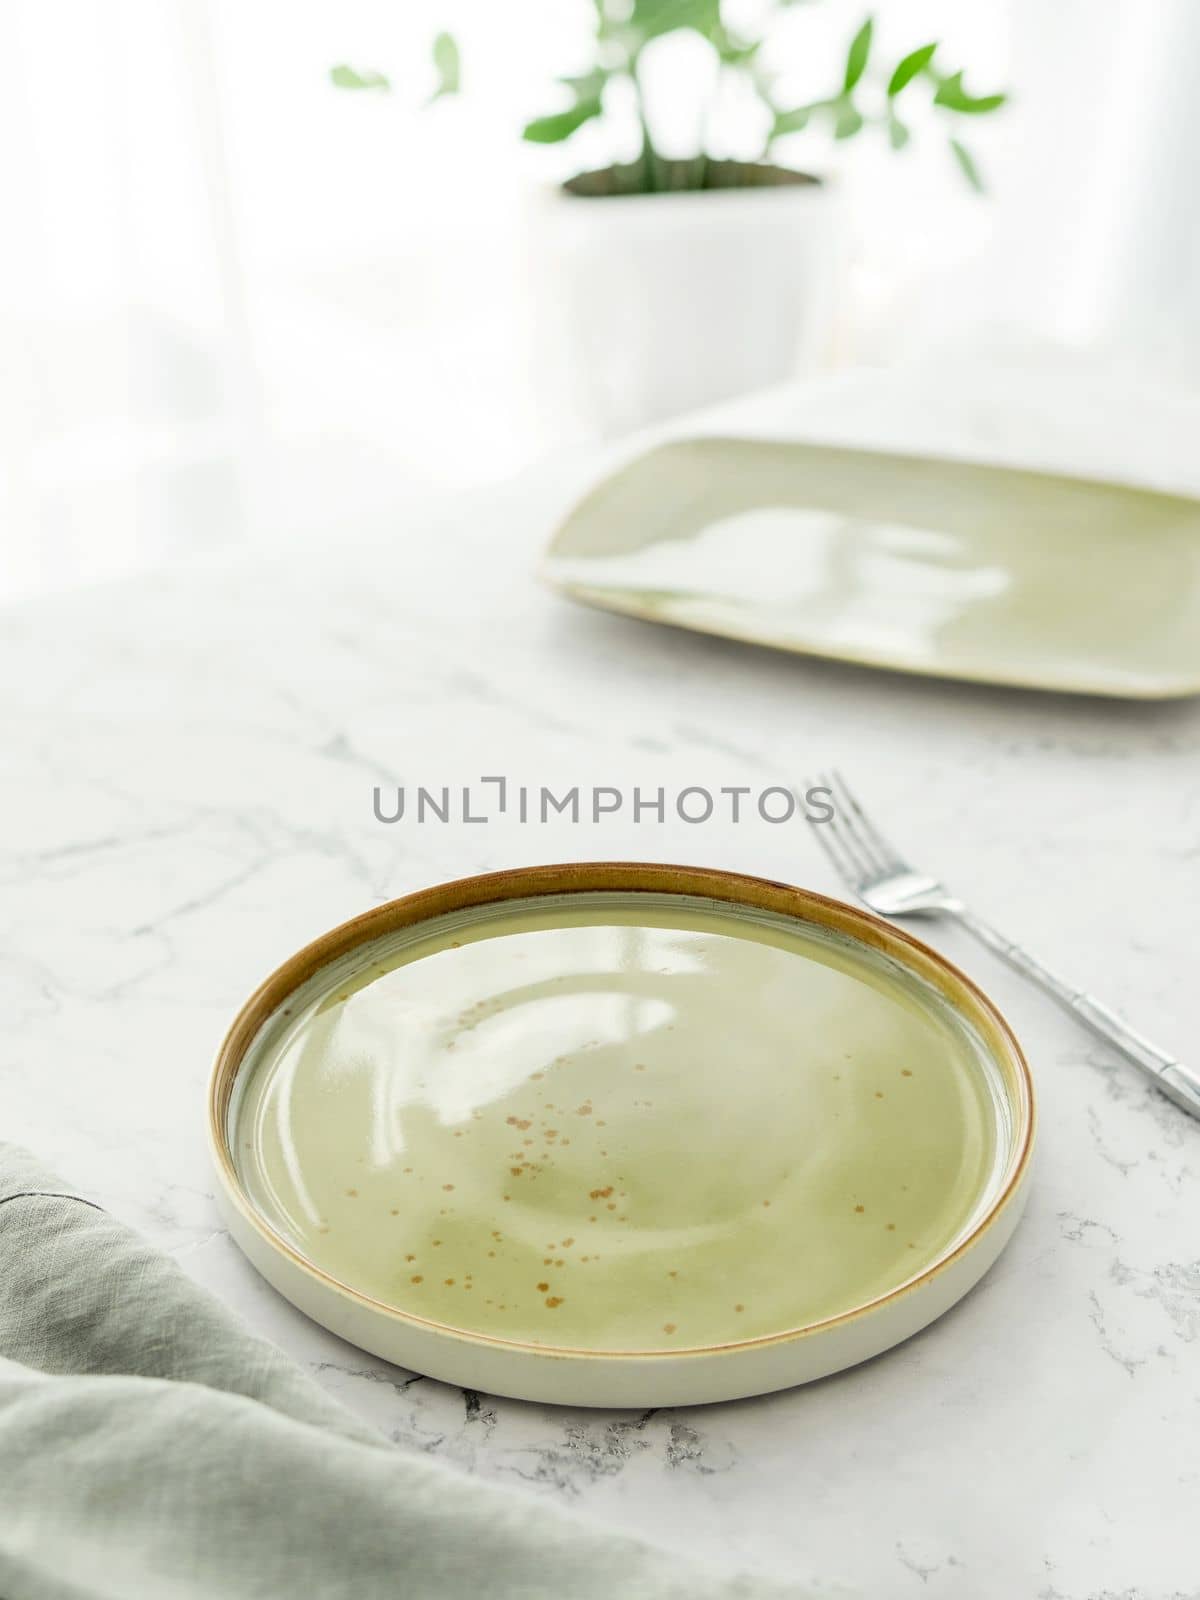 Empty green plate with tablecloth and fork on white marble table in front of window